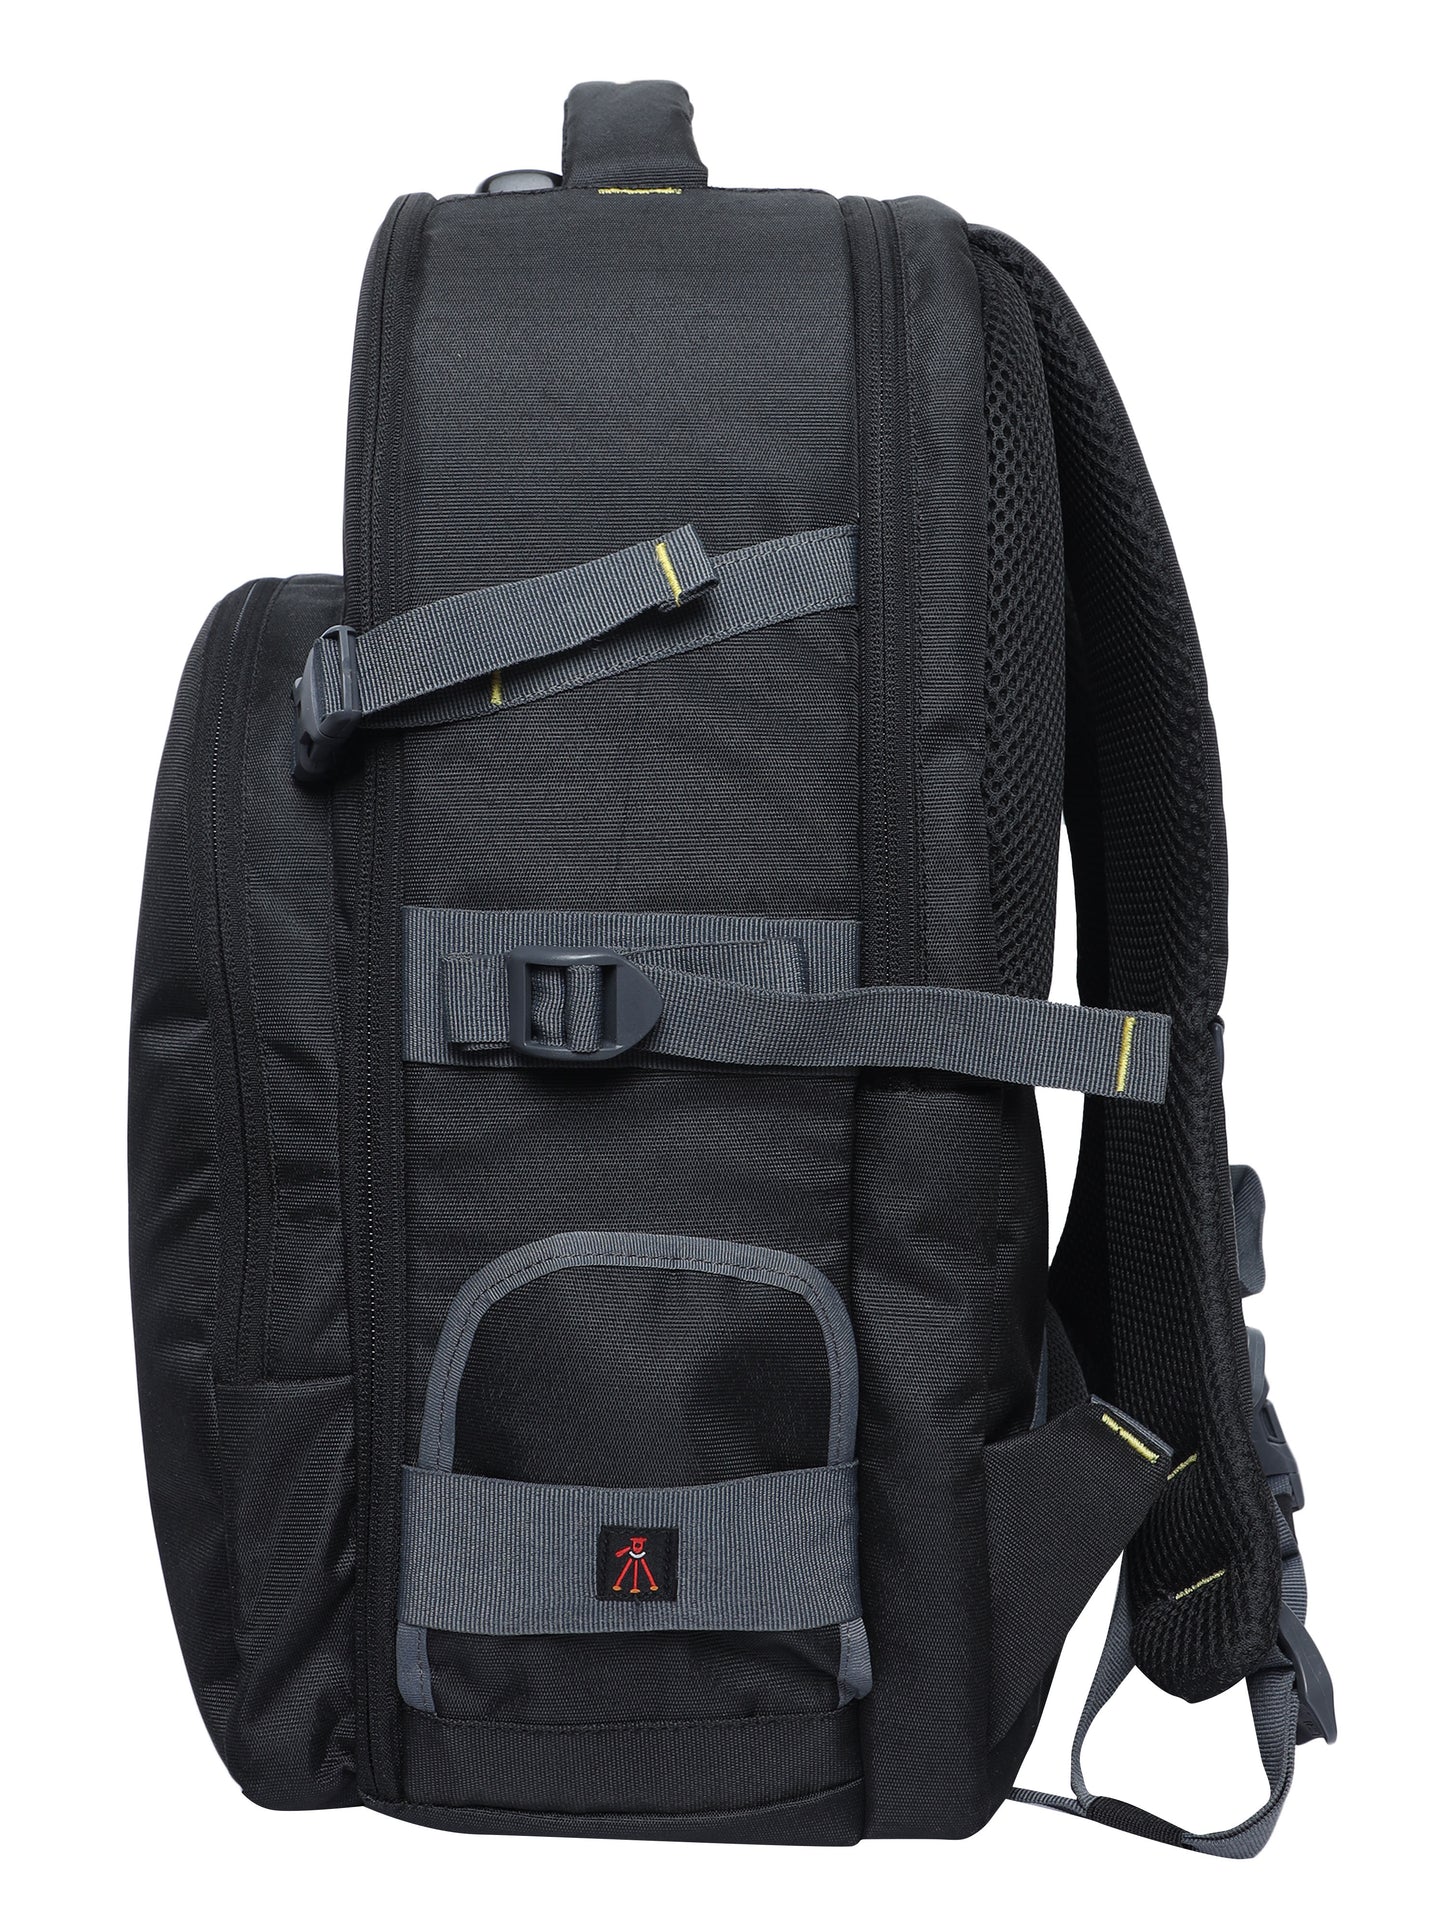 Image: Side view of the G13 BPL 4 DSLR camera bag, highlighting the foldable tripod stand holder. This convenient feature allows the tripod to be securely attached to the bag, providing hands-free portability while maintaining a compact and streamlined profile.